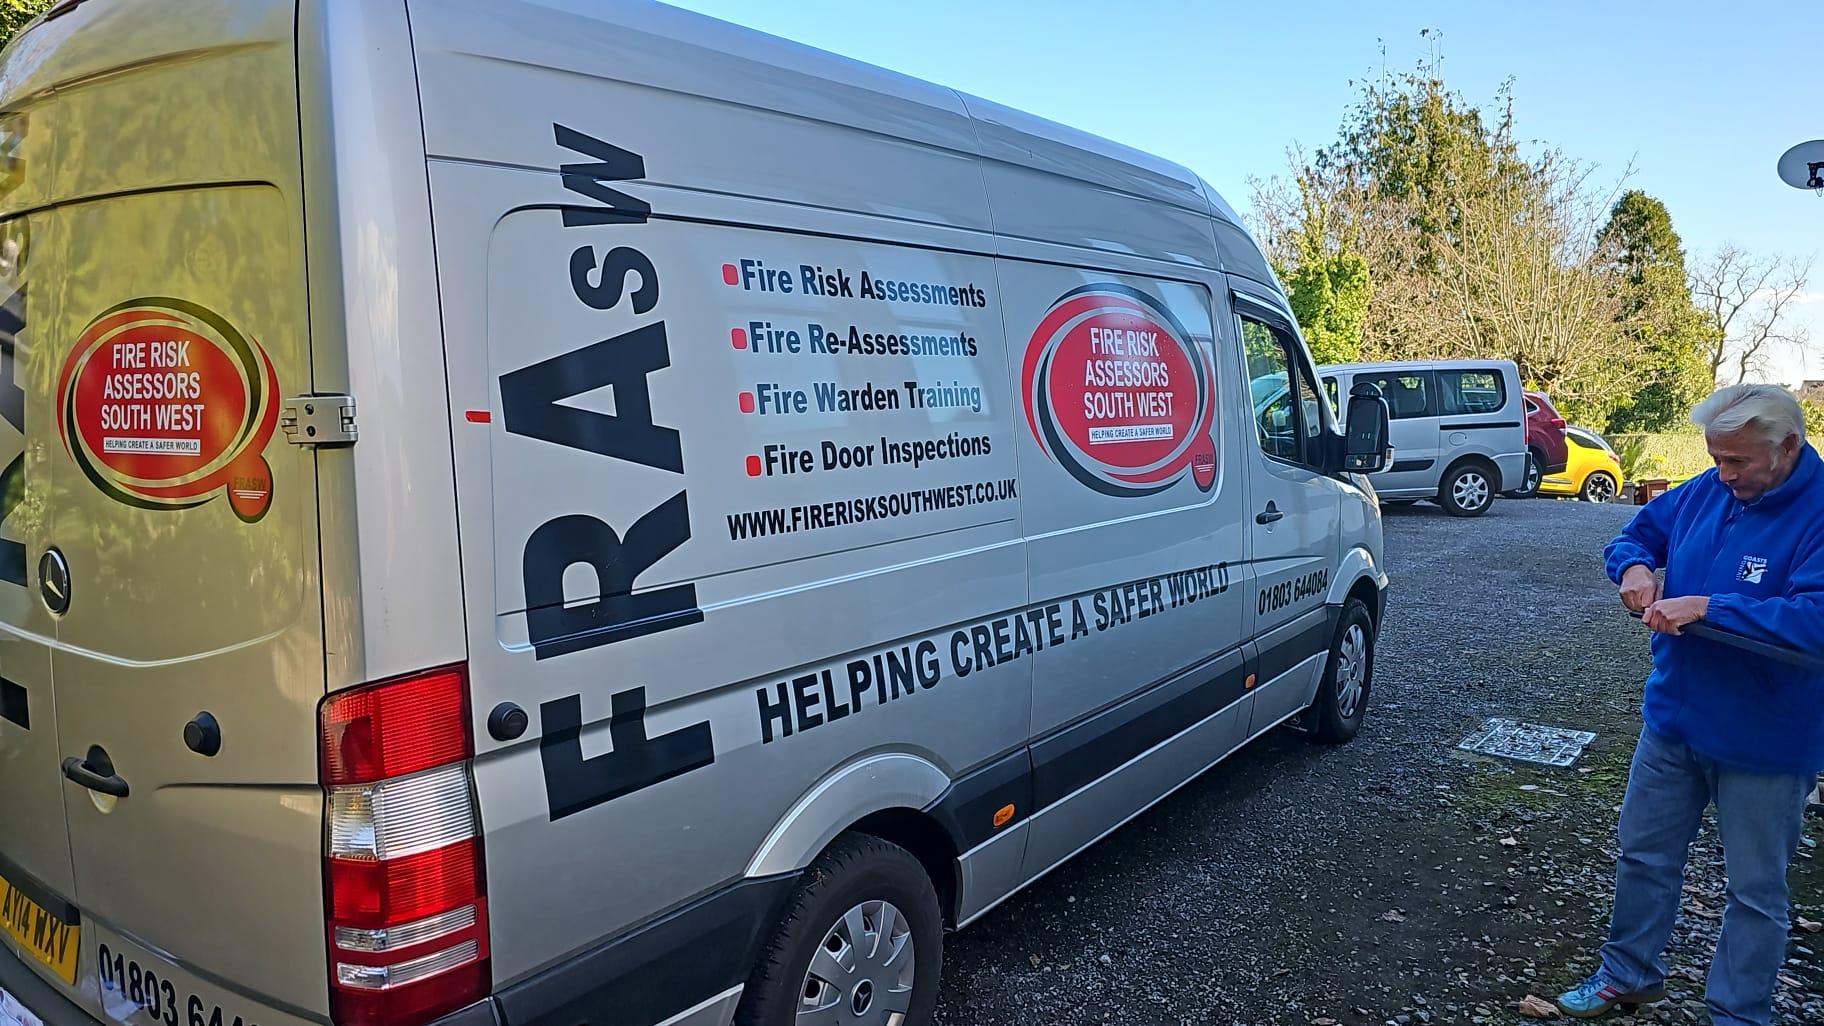 Our Fire Risk Assessment Vans Have All the Necessary Equipment on board for a compliant Fire Risk Assessment